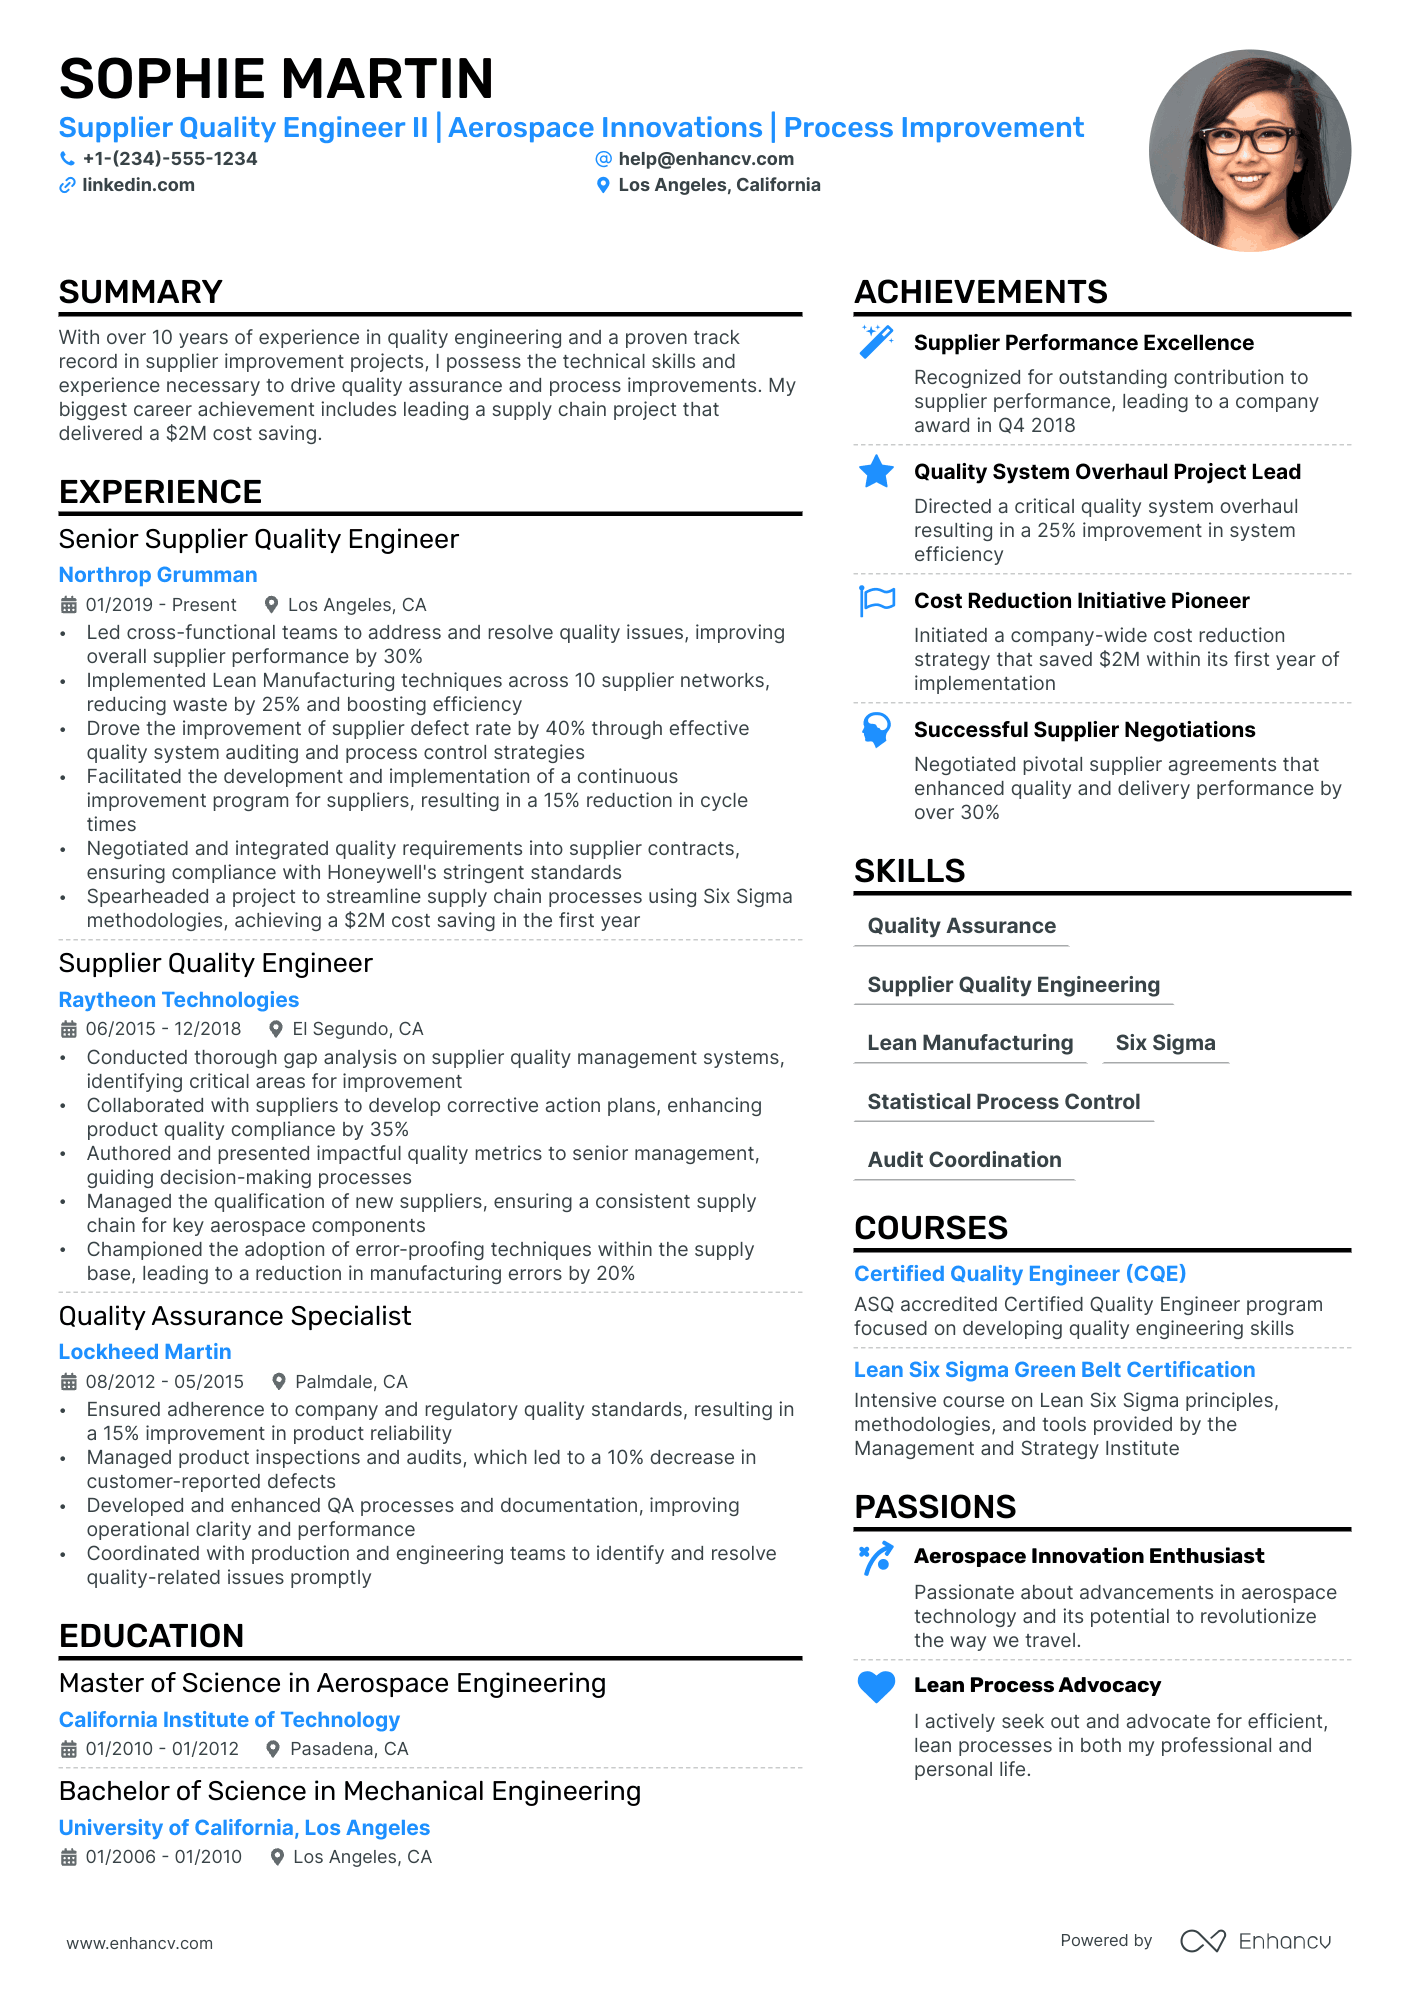 Supplier Quality Engineer resume example